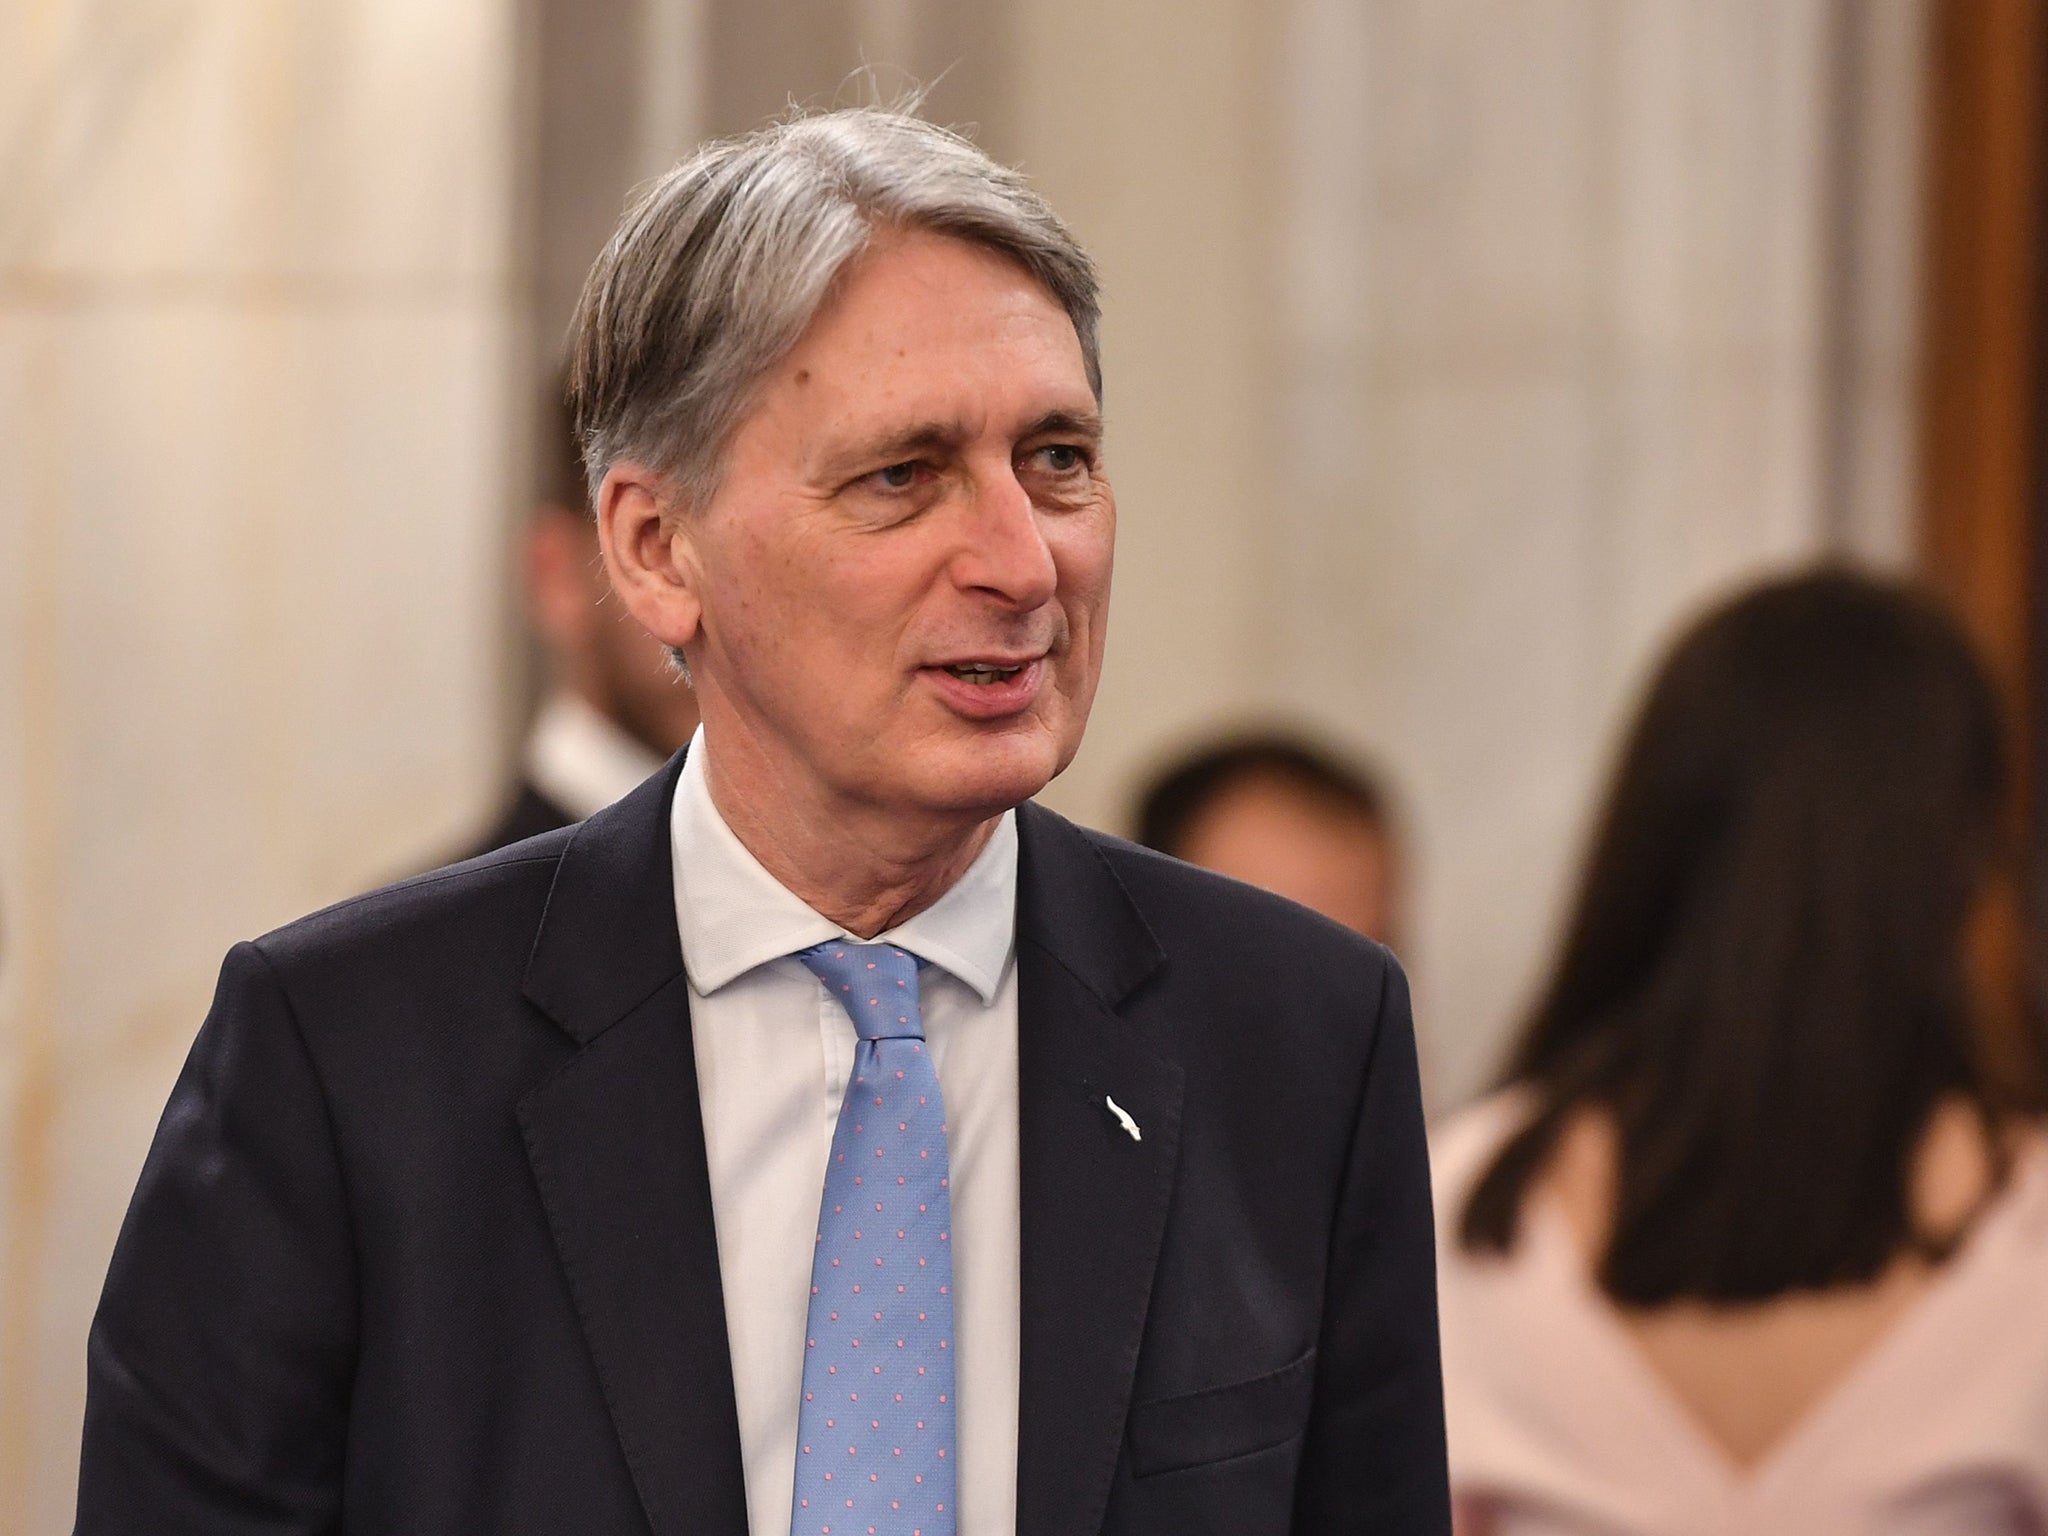 Chancellor says he is ‘optimistic’ that talks can be successfully resolved.